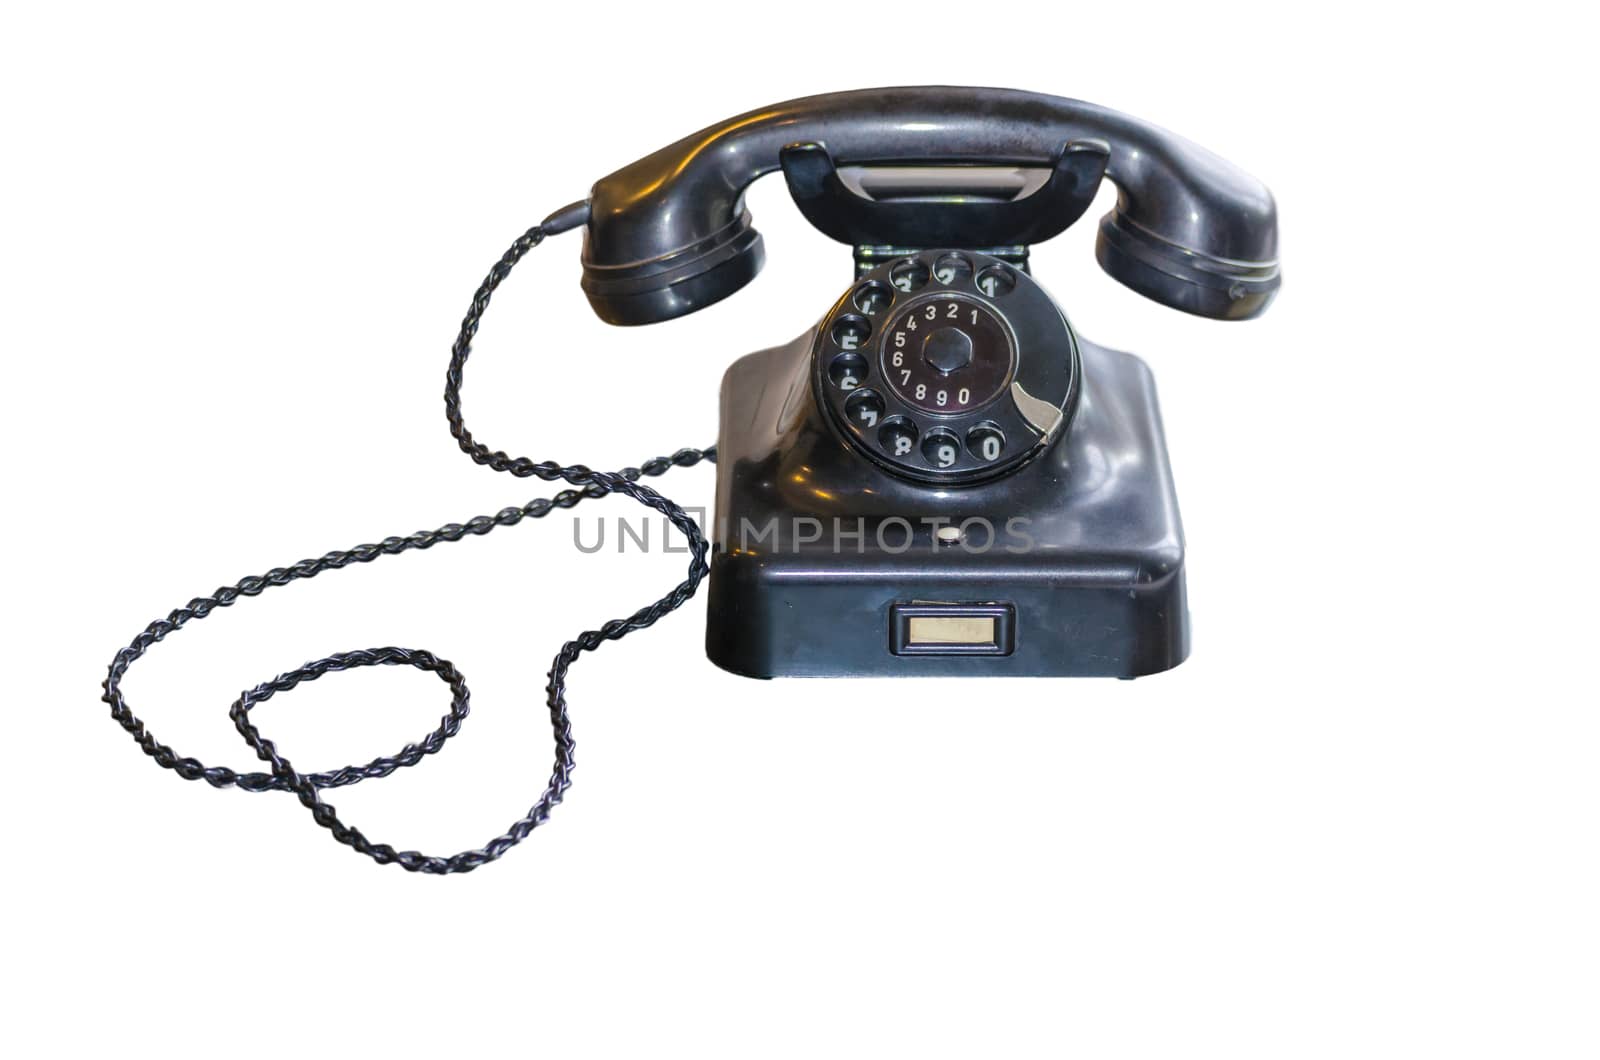 Antique Telephone Black Bakelite with dial on white background 